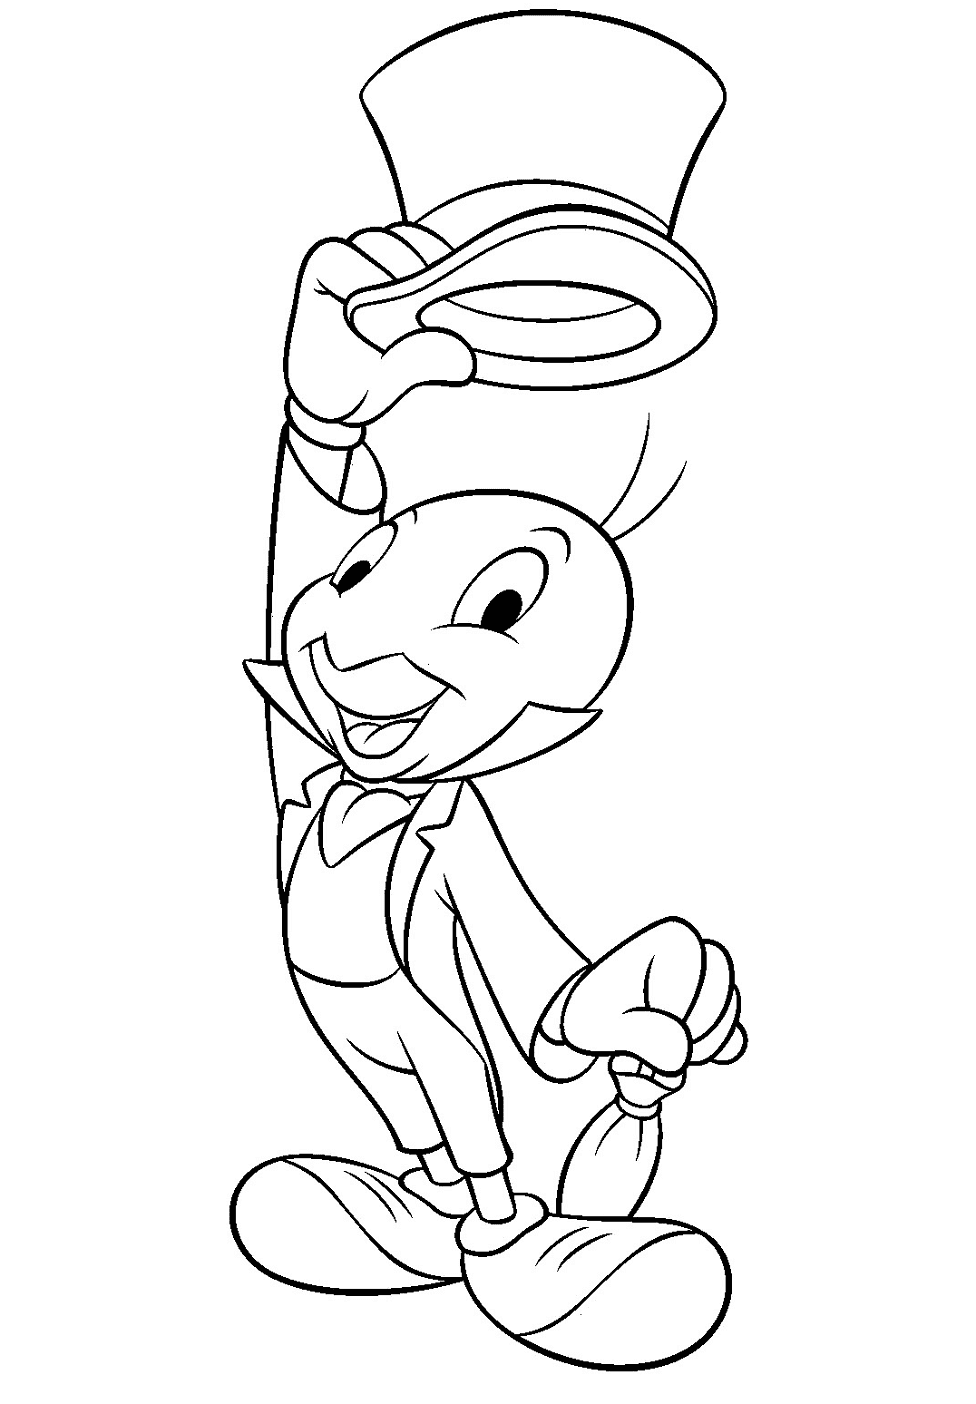 Jiminy Cricket from Pinocchio Coloring Page